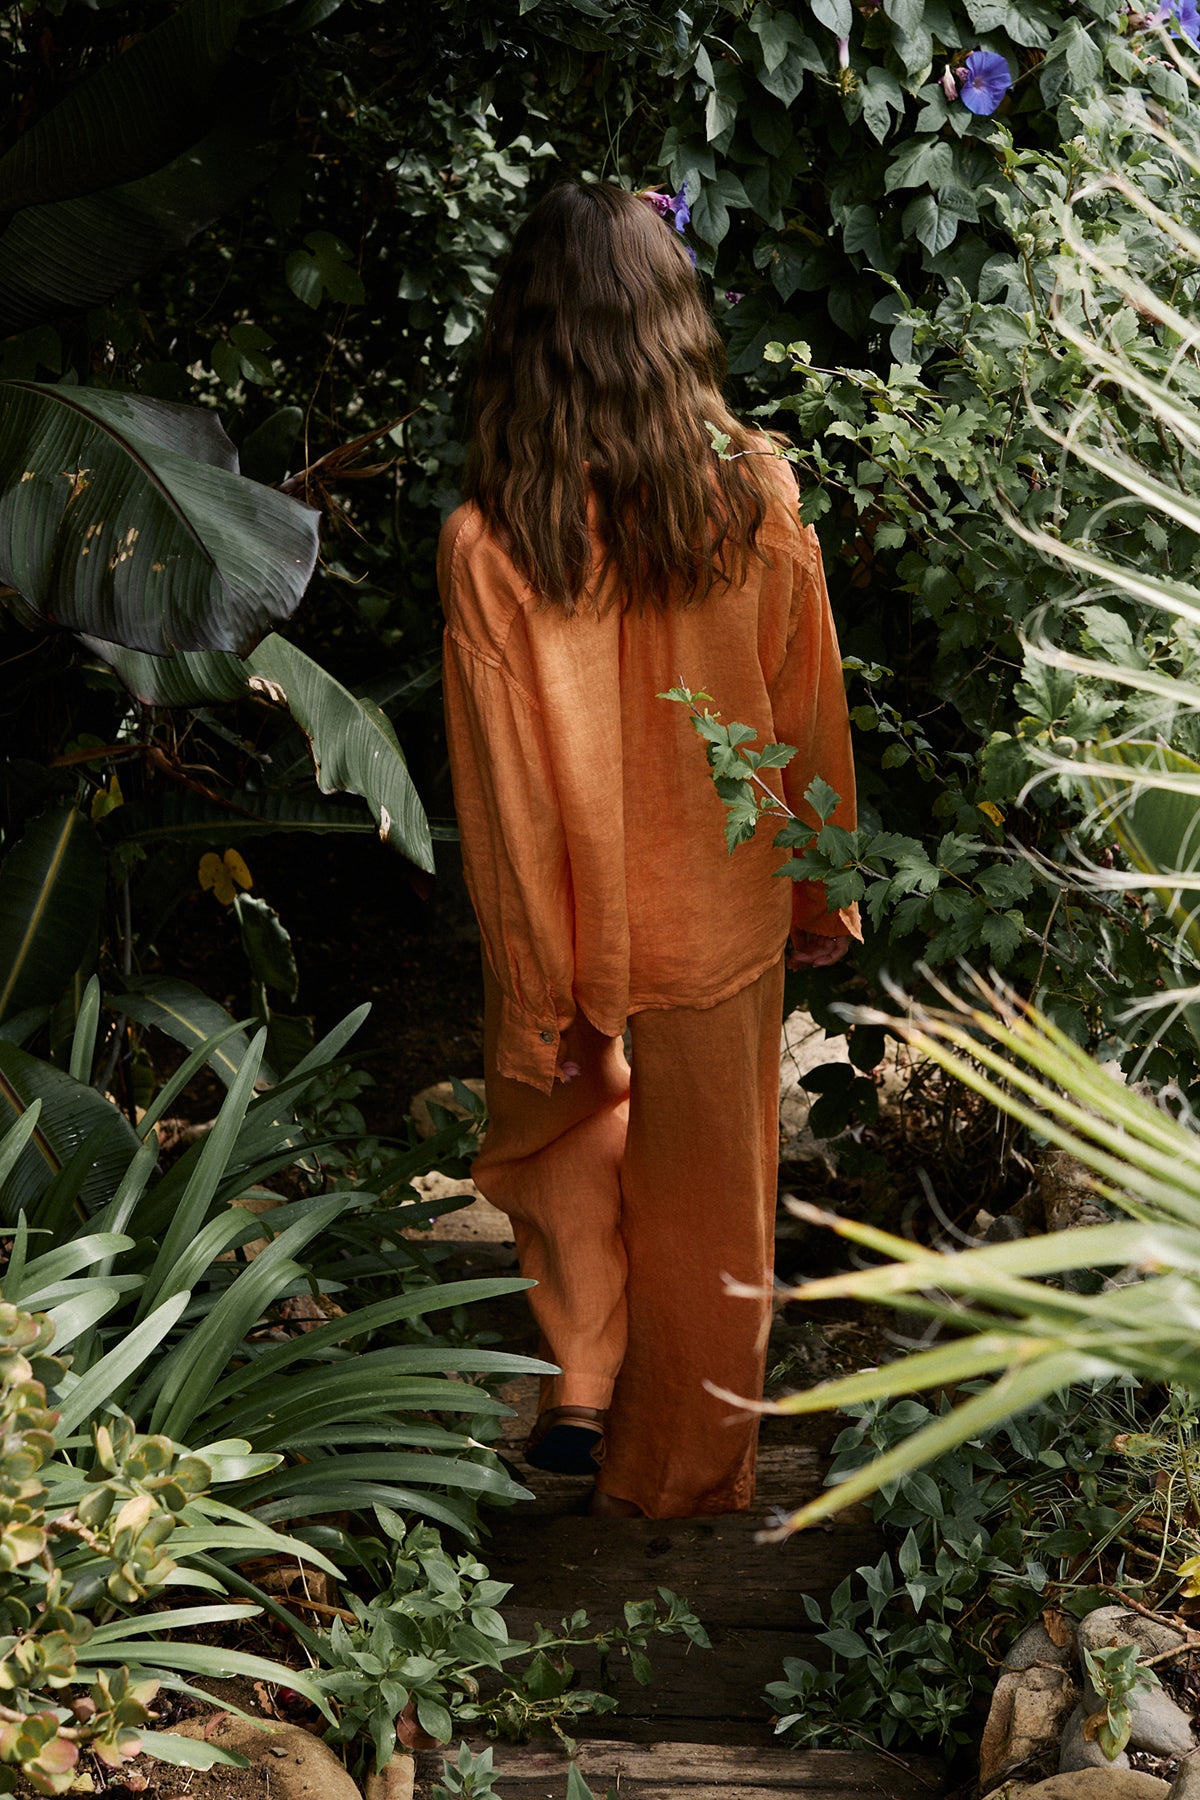 Women walking down wooden steps outdoors surrounded by trees wearing Eden shirt in orange heat with Lola pant, necklaces and sandals full length back-26087886192833